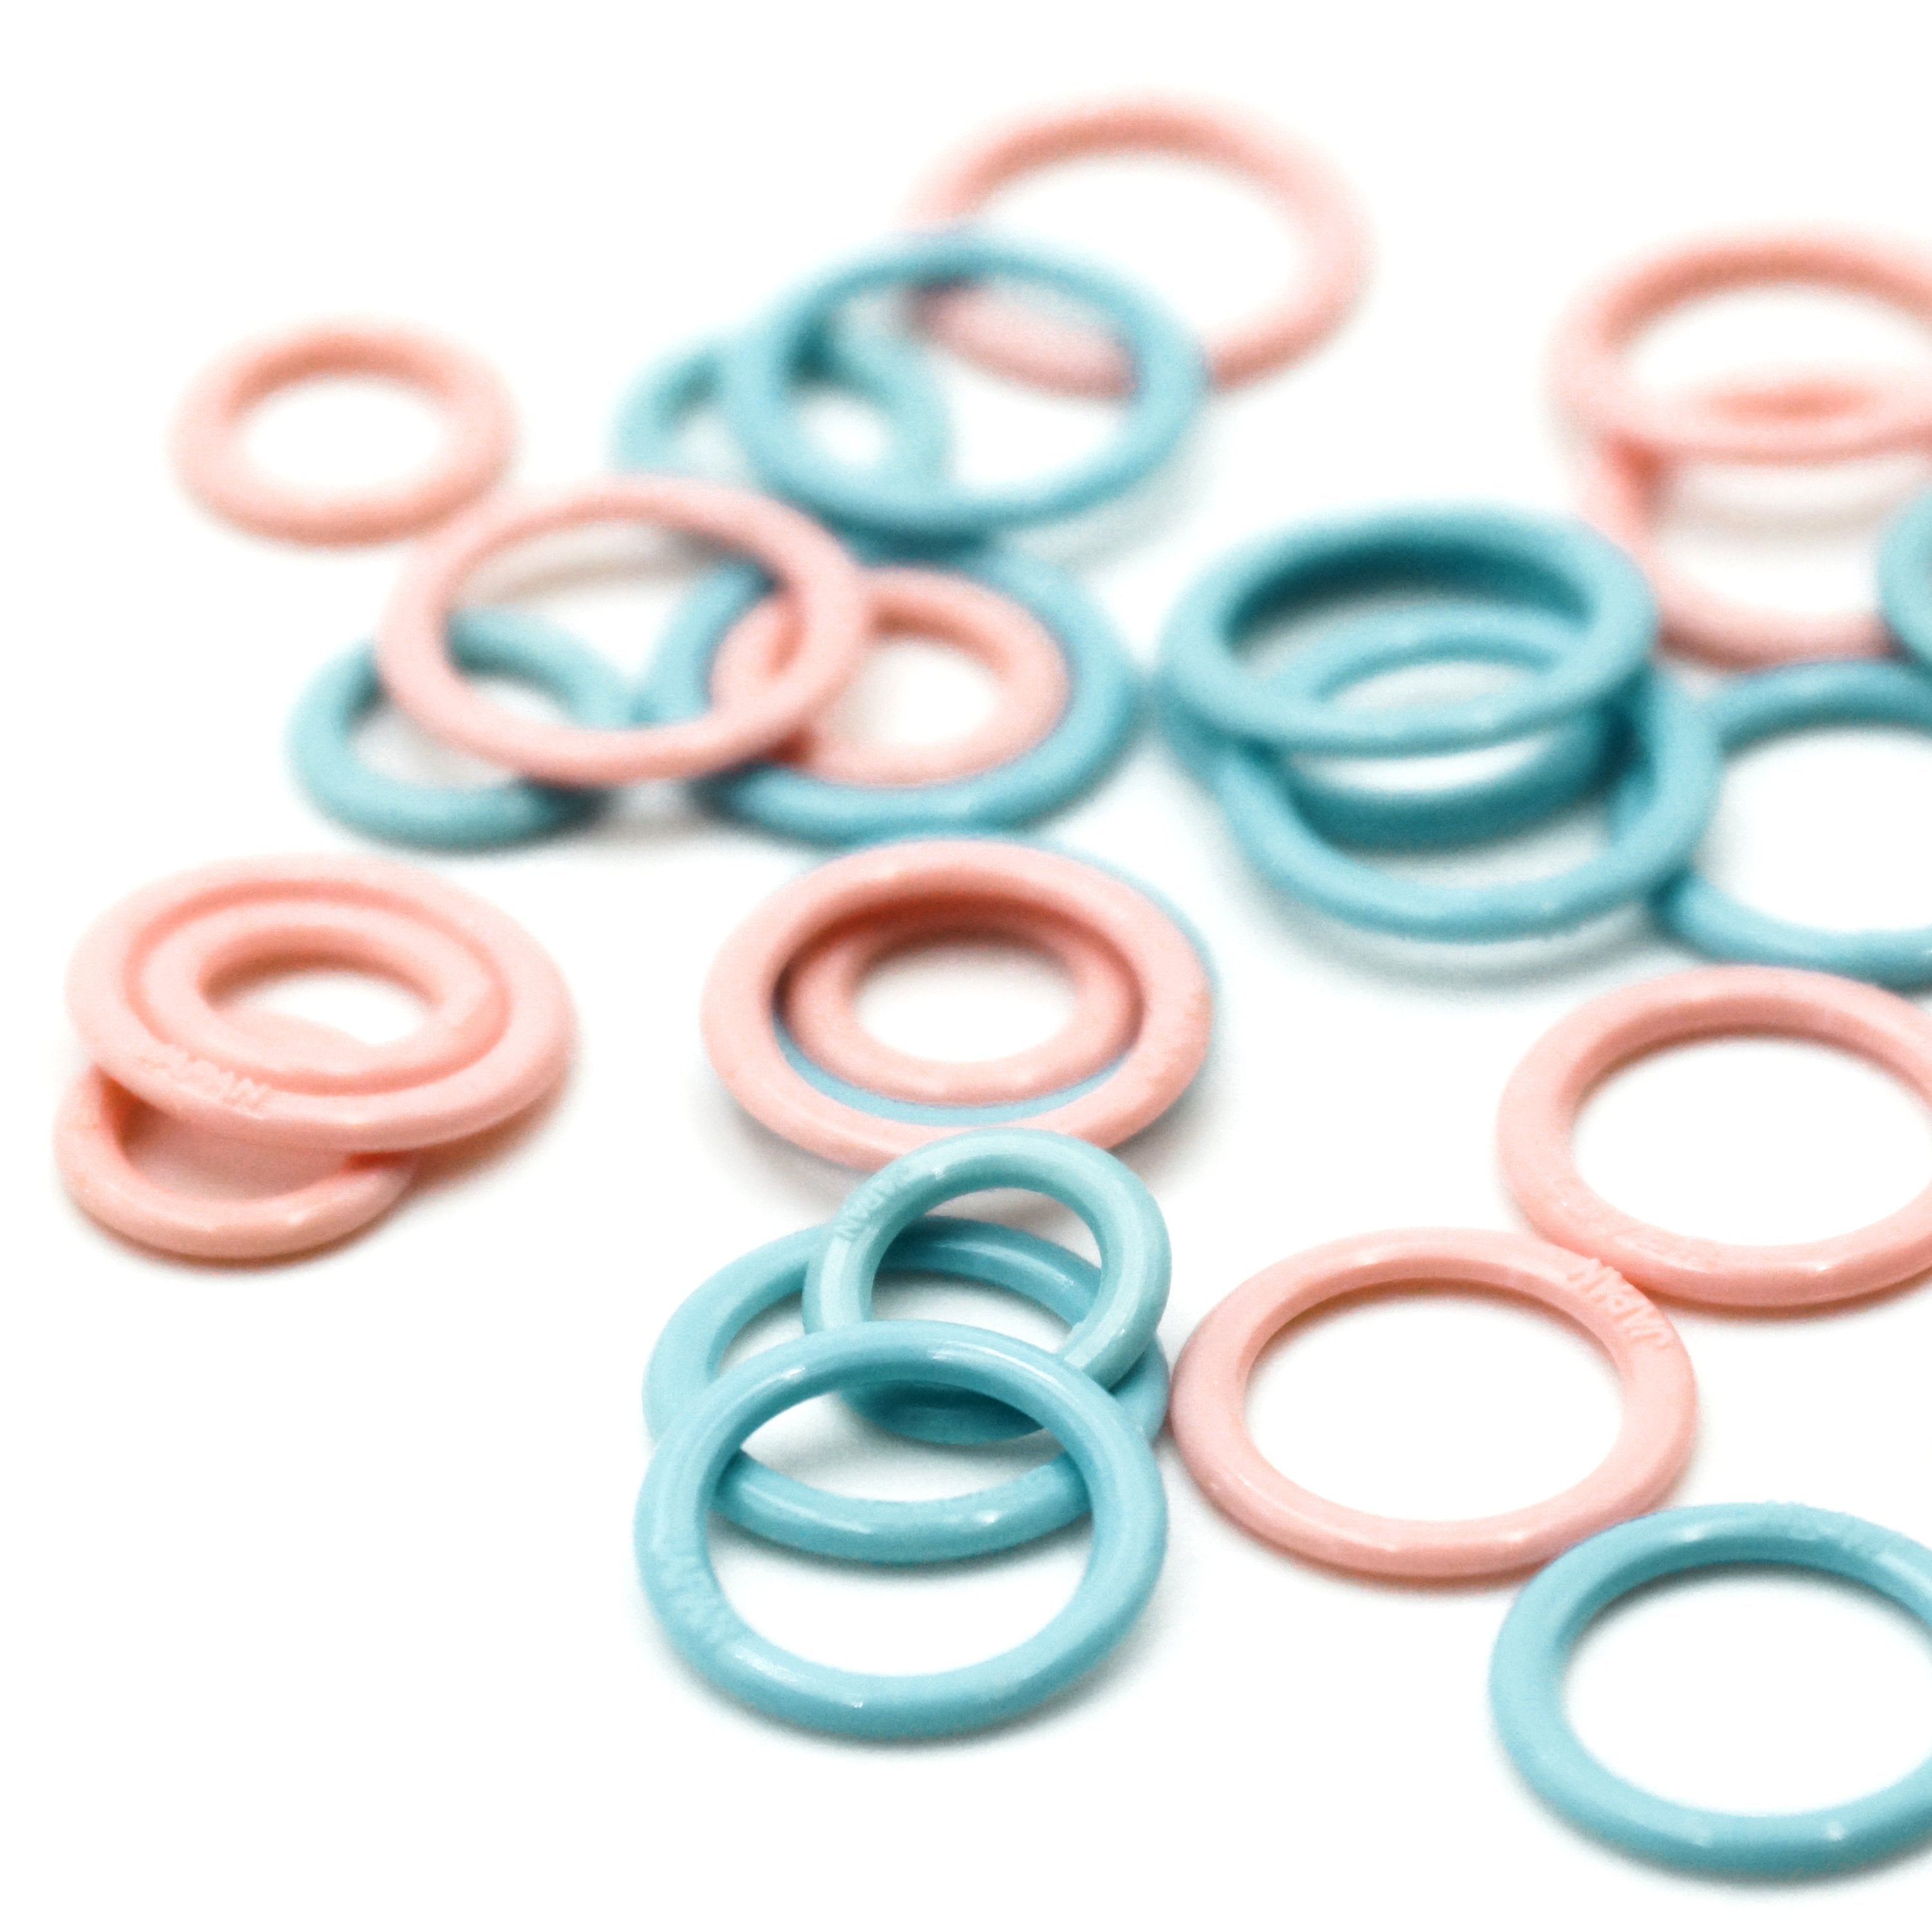 Clover Soft Stitch Ring Markers 30 ct. – Wool and Company